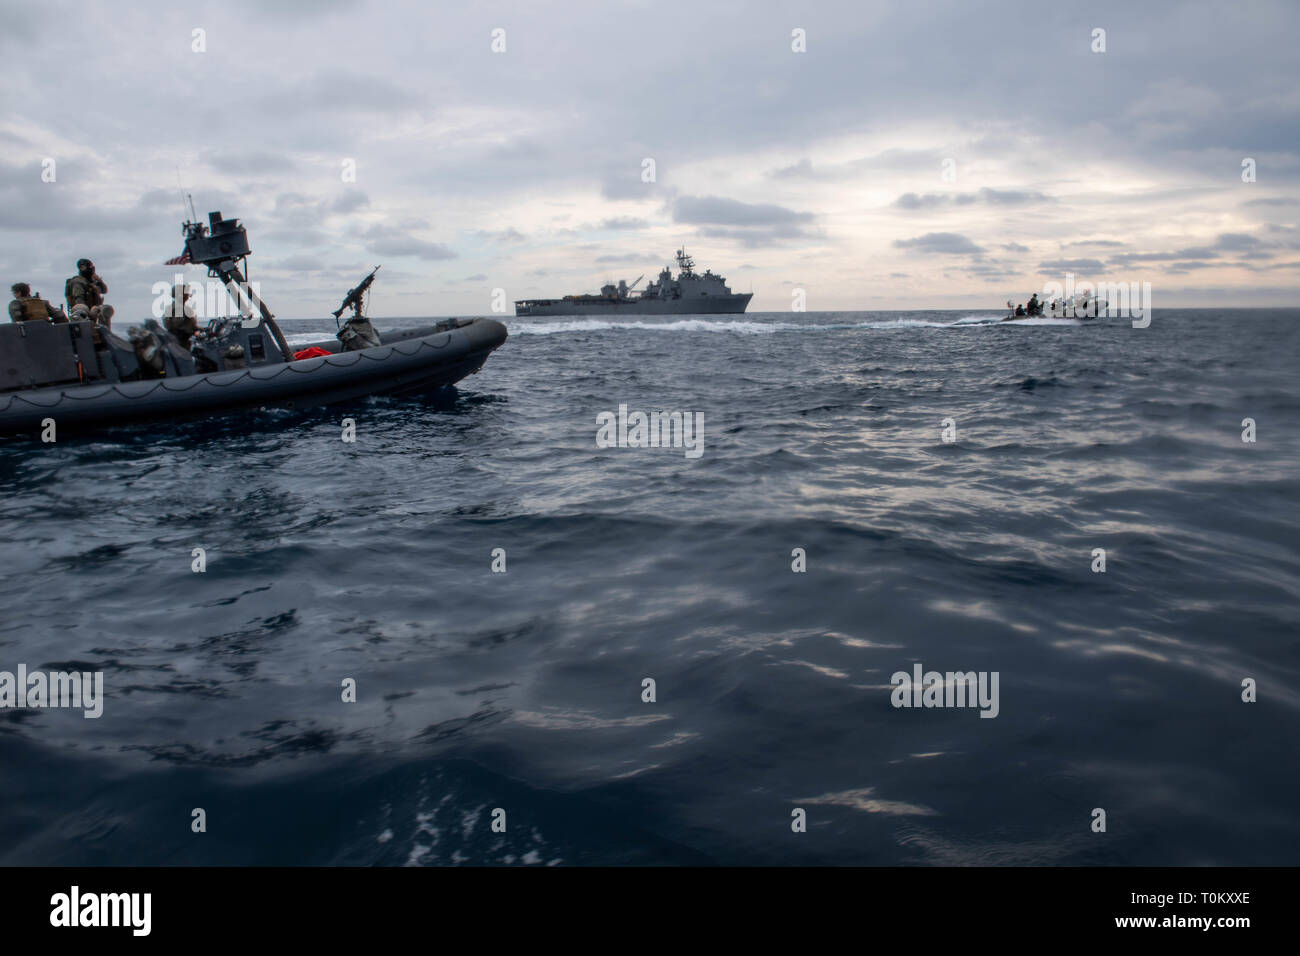 190319-N-HD110-0706  PACIFIC OCEAN (March 19, 2019) Sailors attached to Assault Craft Unit (ACU) 1 and Sailors apart of the visit, board, search, and seizure (VBSS) team from the Harpers Ferry-class amphibious dock landing ship USS Harpers Ferry (LSD 49 transit to a contact vessel during a VBSS exercise. Harpers Ferry is underway conducting routine operations as a part of USS Boxer Amphibious Ready Group (ARG) in the eastern Pacific Ocean. (U.S. Navy photo by Mass Communication Specialist 3rd Class Danielle A. Baker) Stock Photo